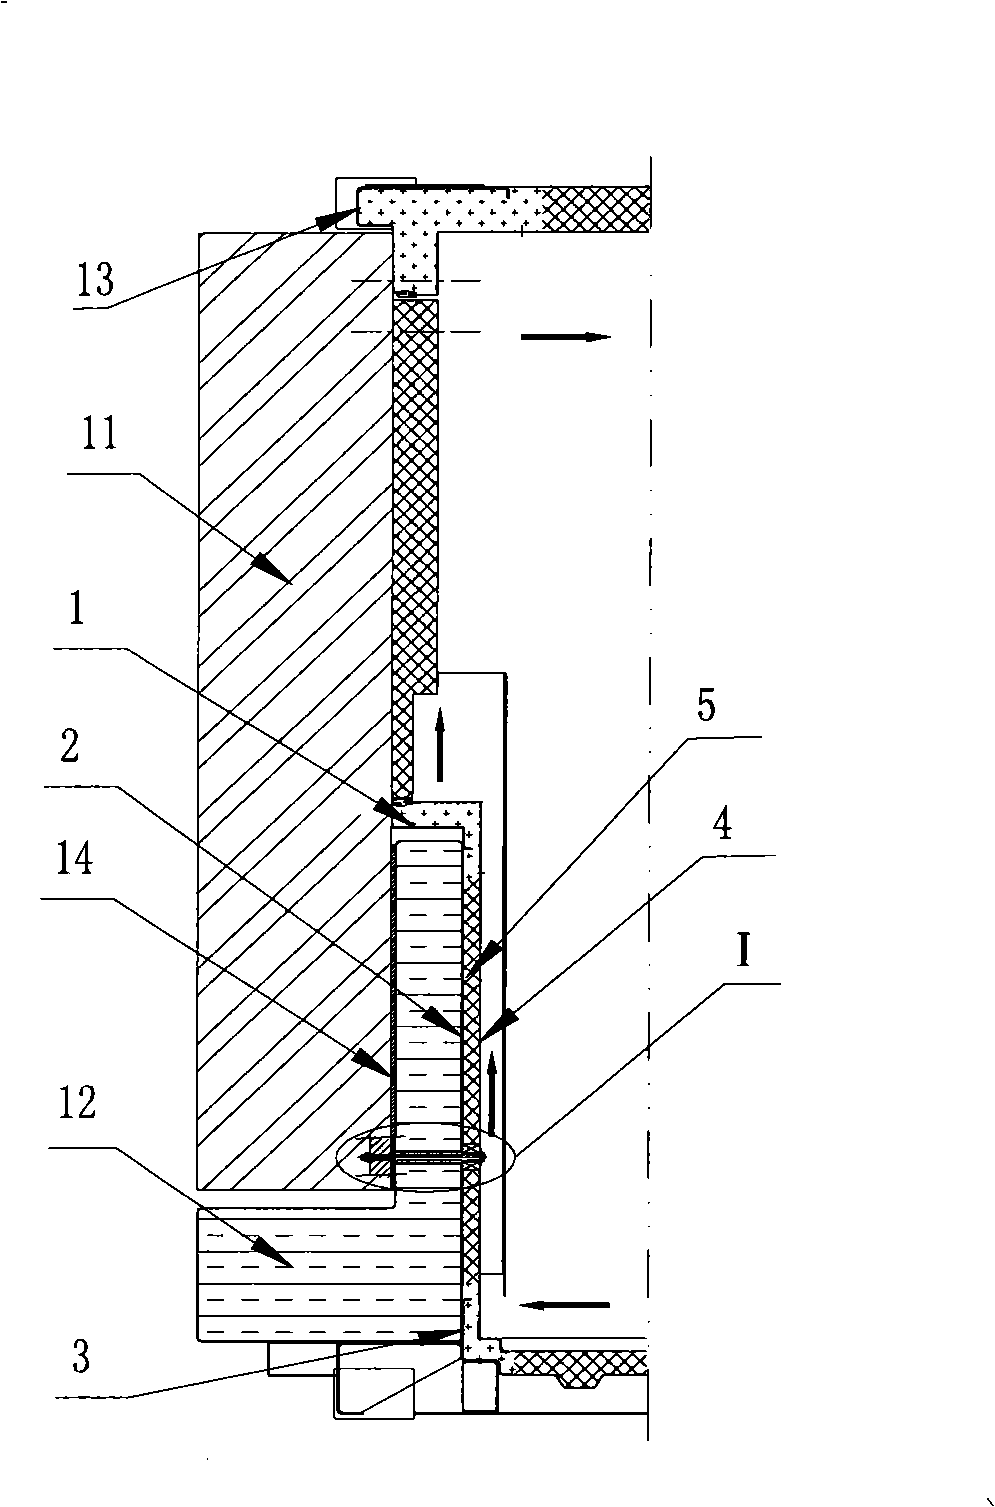 Front frame of refrigerated container